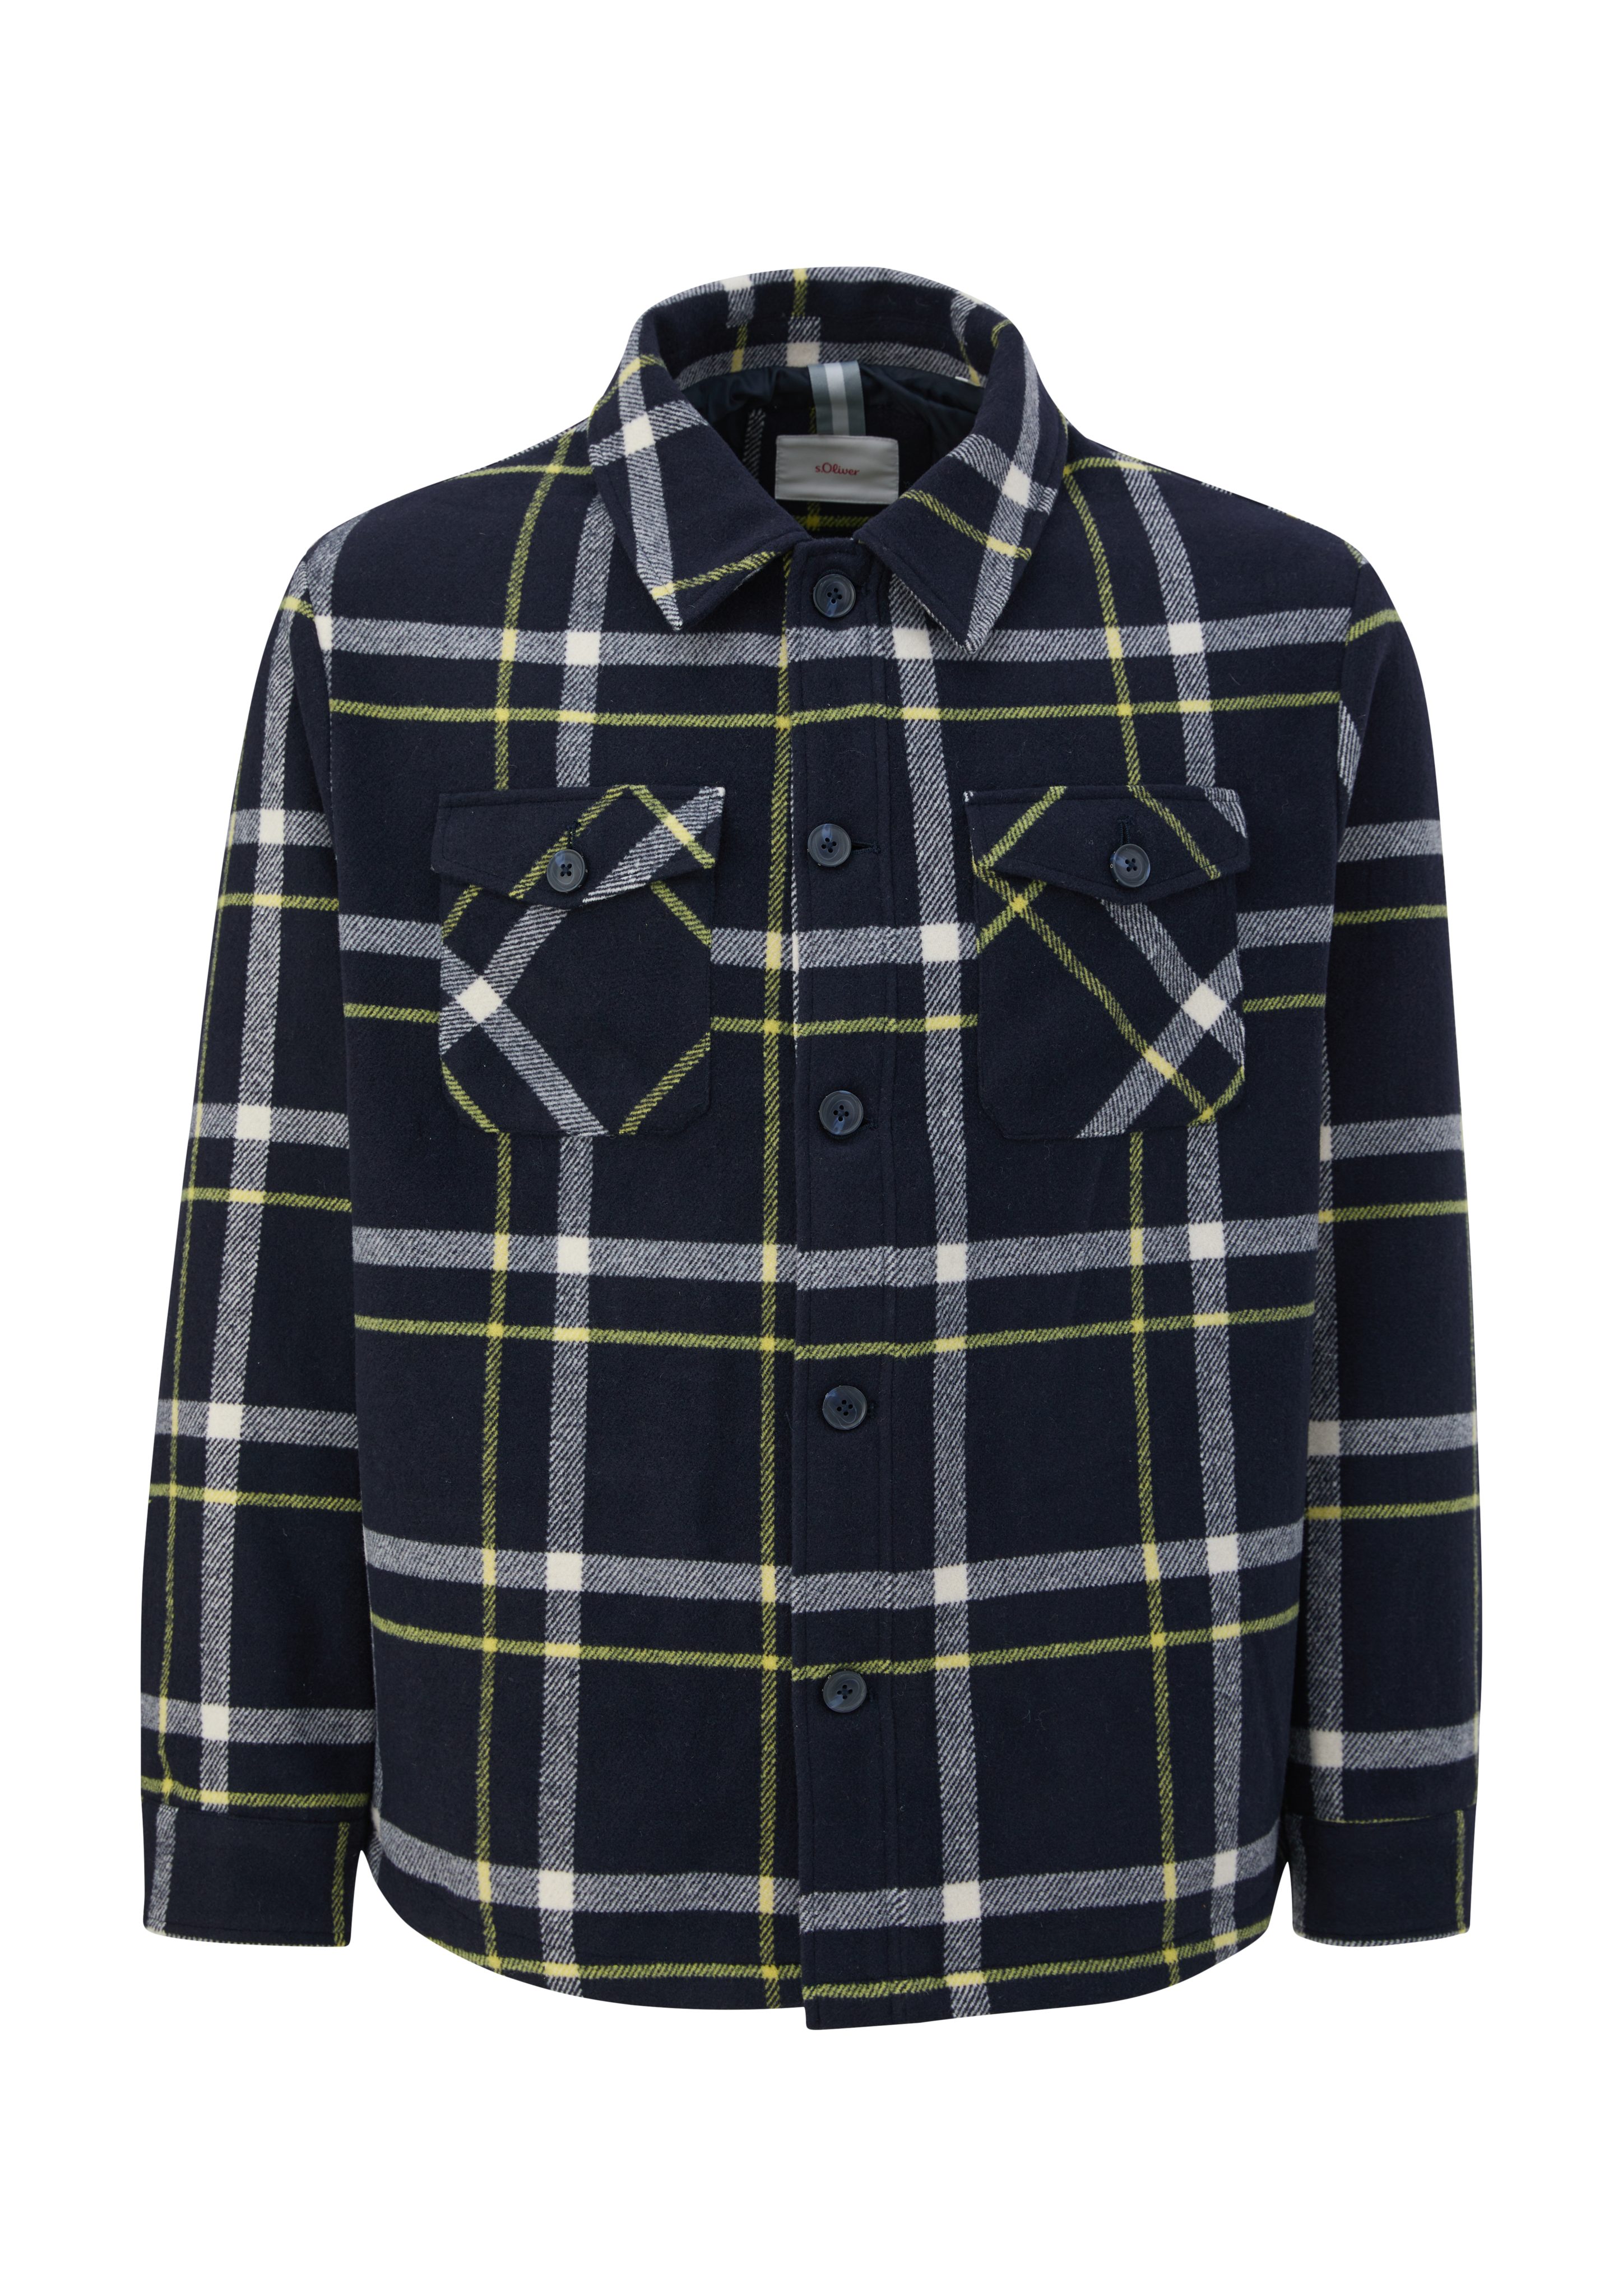 Overshirt Outdoorjacke in Flanell-Qualität s.Oliver